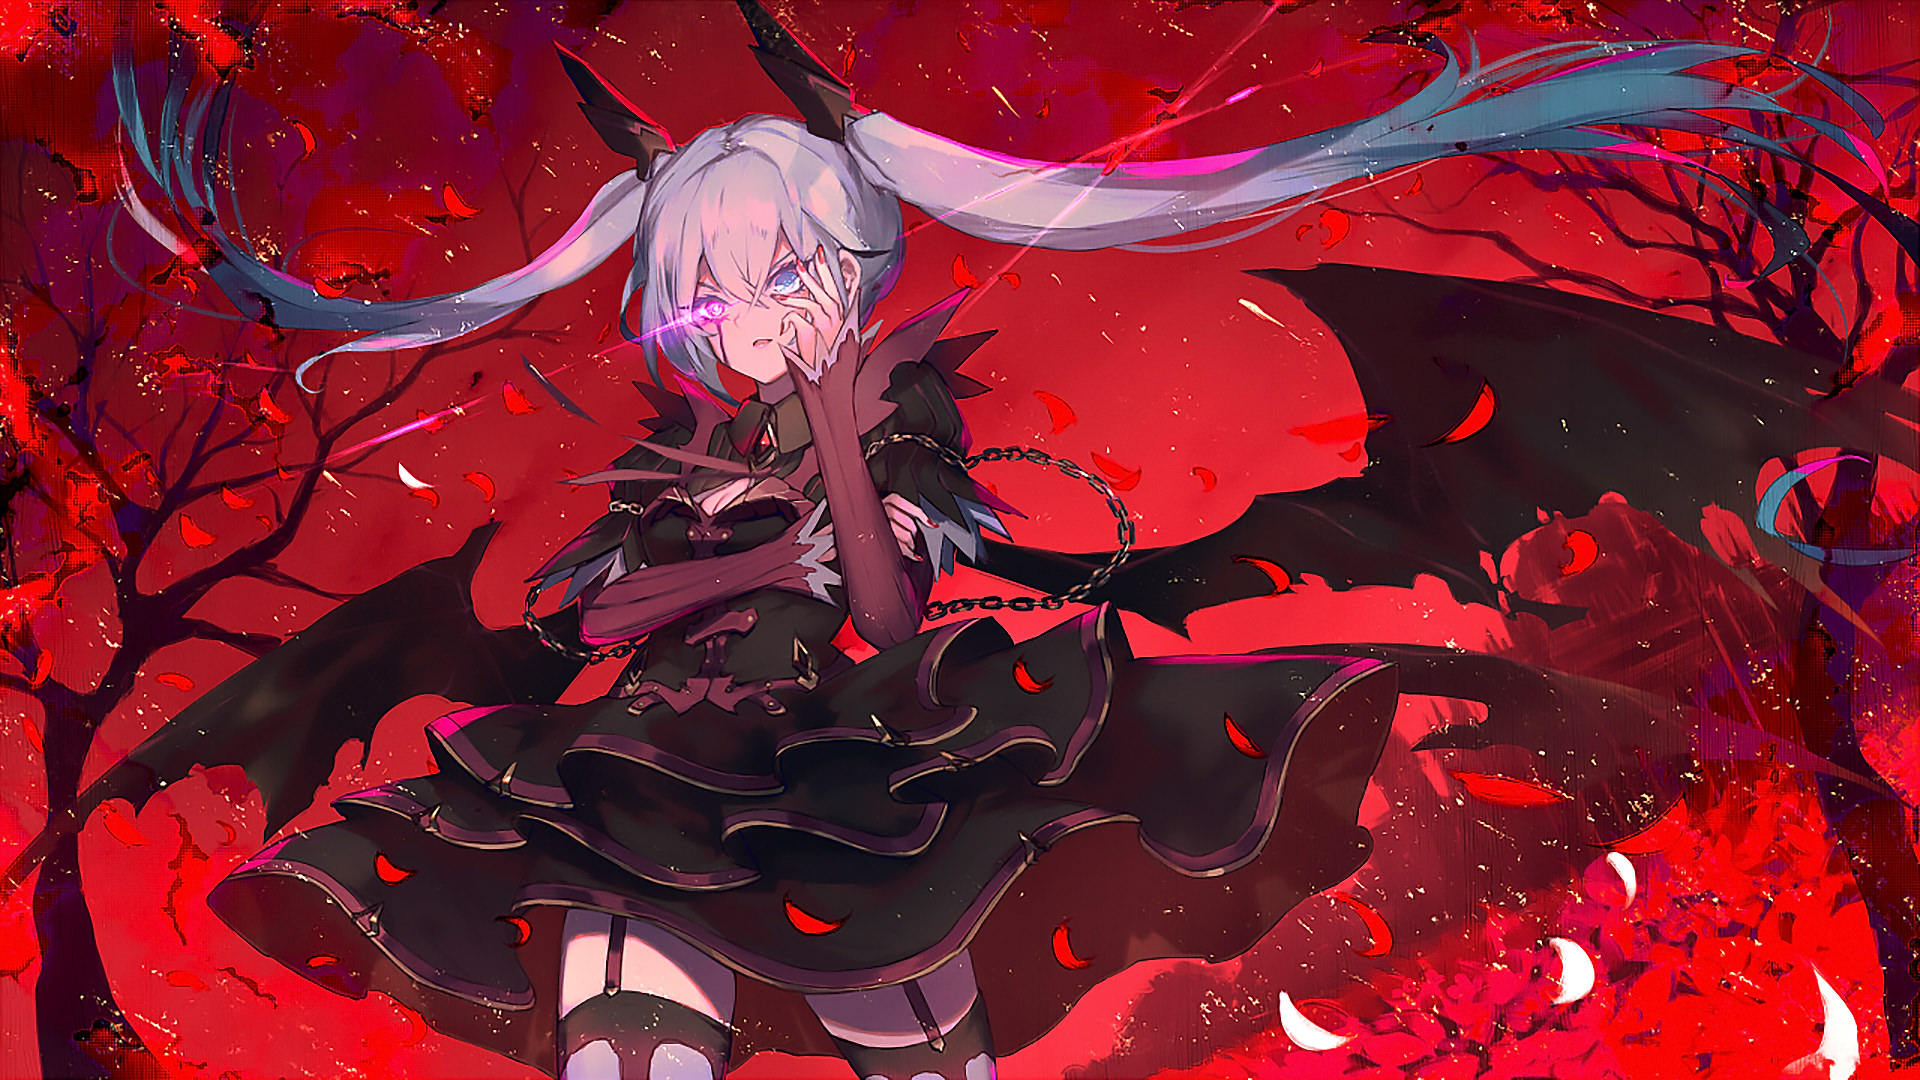 Anime 1920x1080 twintails wings glowing eyes gothic lolita red background Hatsune Miku Vocaloid anime anime girls red